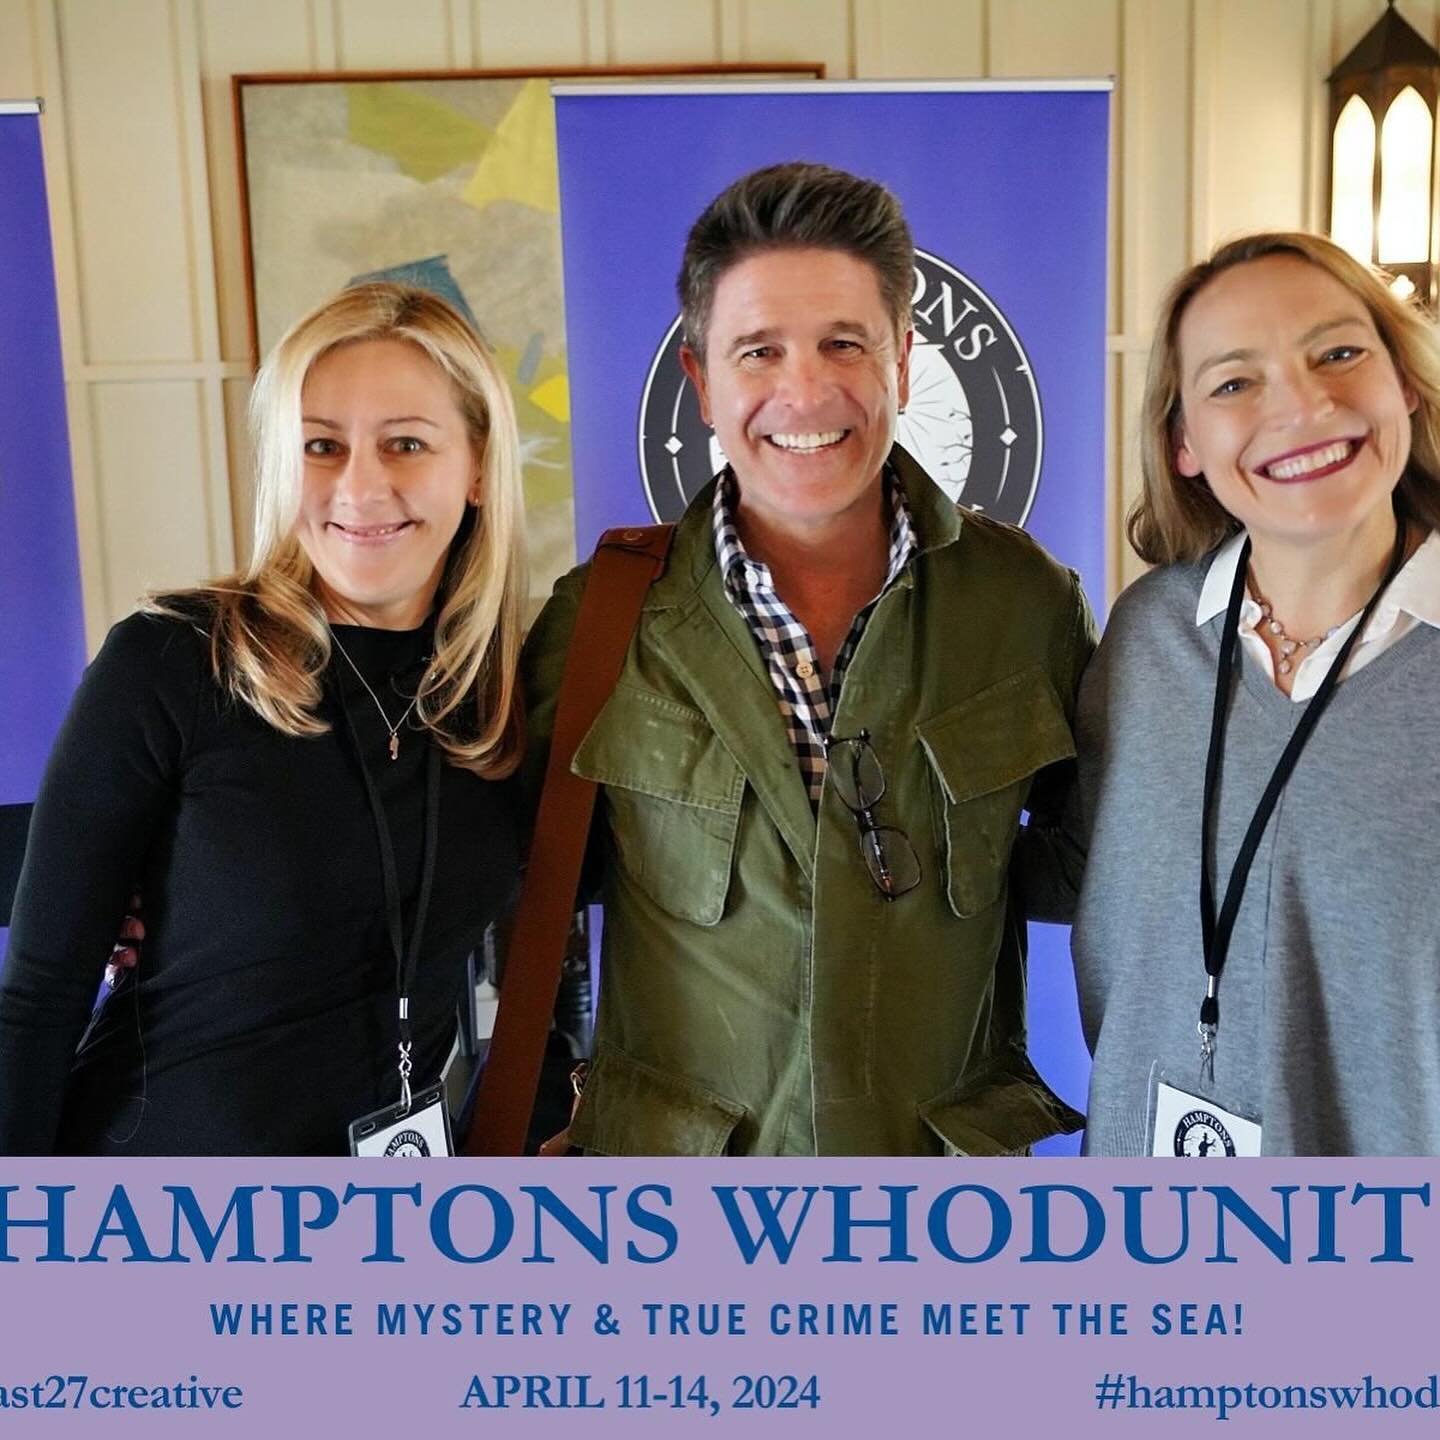 The second day of the @hamptonswhodunit was even more phenomenal than the first. What a thrill to talk with consummate pros @realbradthor and @wendywalkerauthor and attend panels featuring the dazzling @ashleywinsteadbooks, @jenniferhillierbooks, @yr